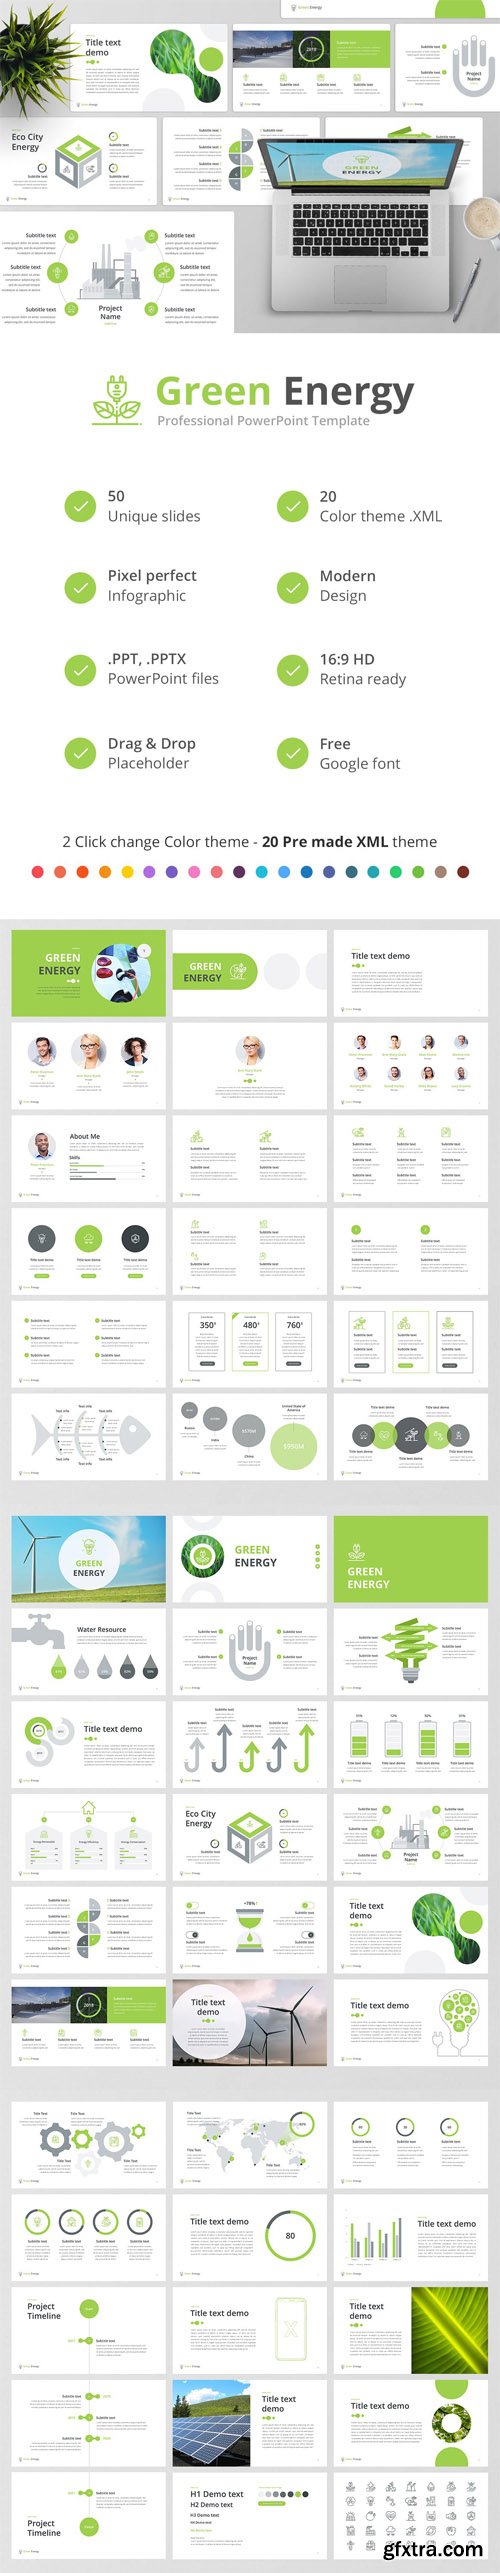 Powerpoint Templates Ppt Pot Pps Pptx Potx Ppsx Thmx Page 801